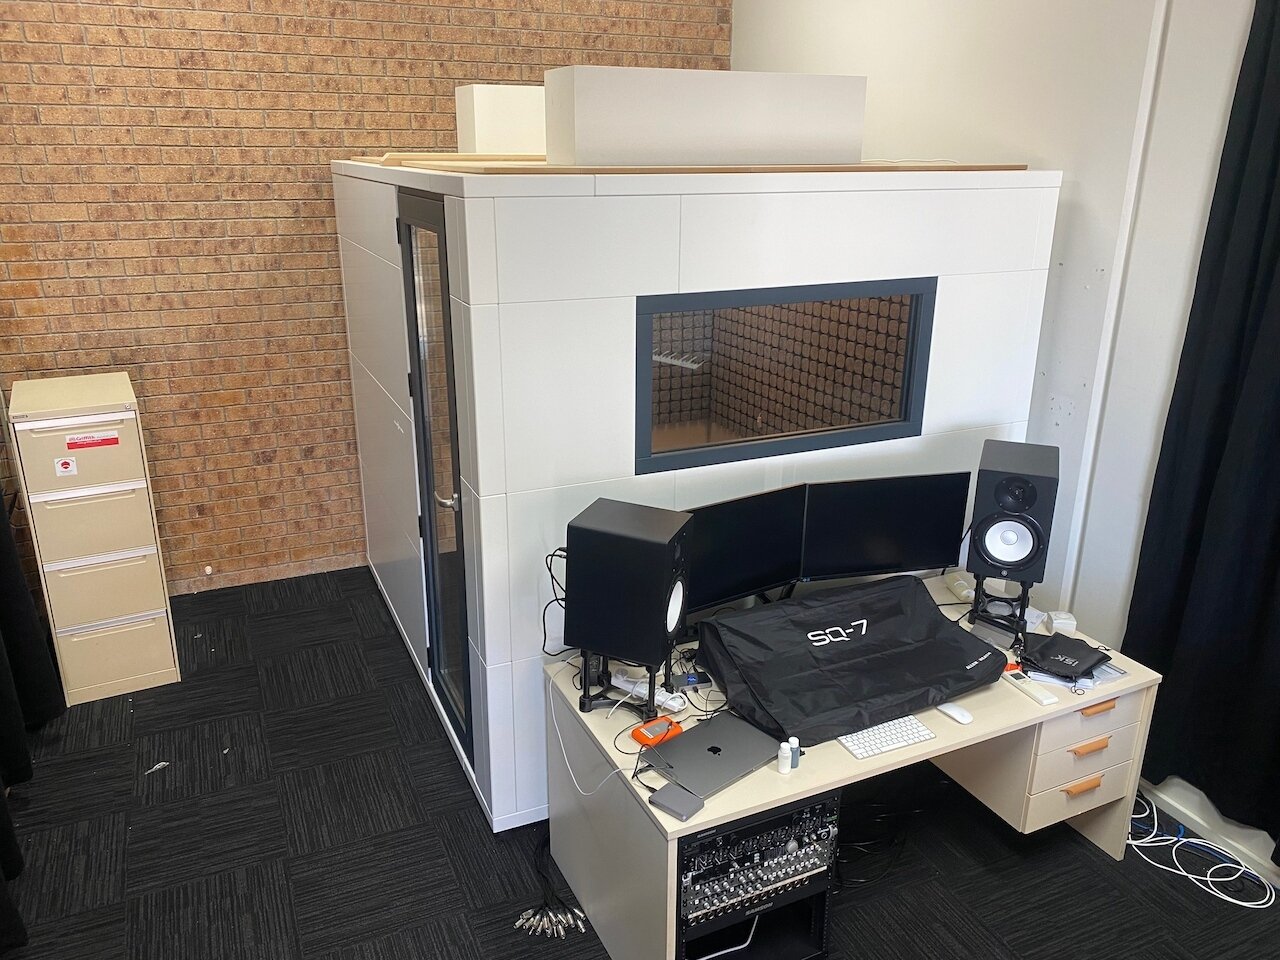 Site Shot - Custom Studiobricks for a QLD College⁠
⁠
The client brief was to create a recording booth with a window above the external mixing desk so the students &amp; teachers can see each other, providing a professional studio set-up.⁠
Studiobrick